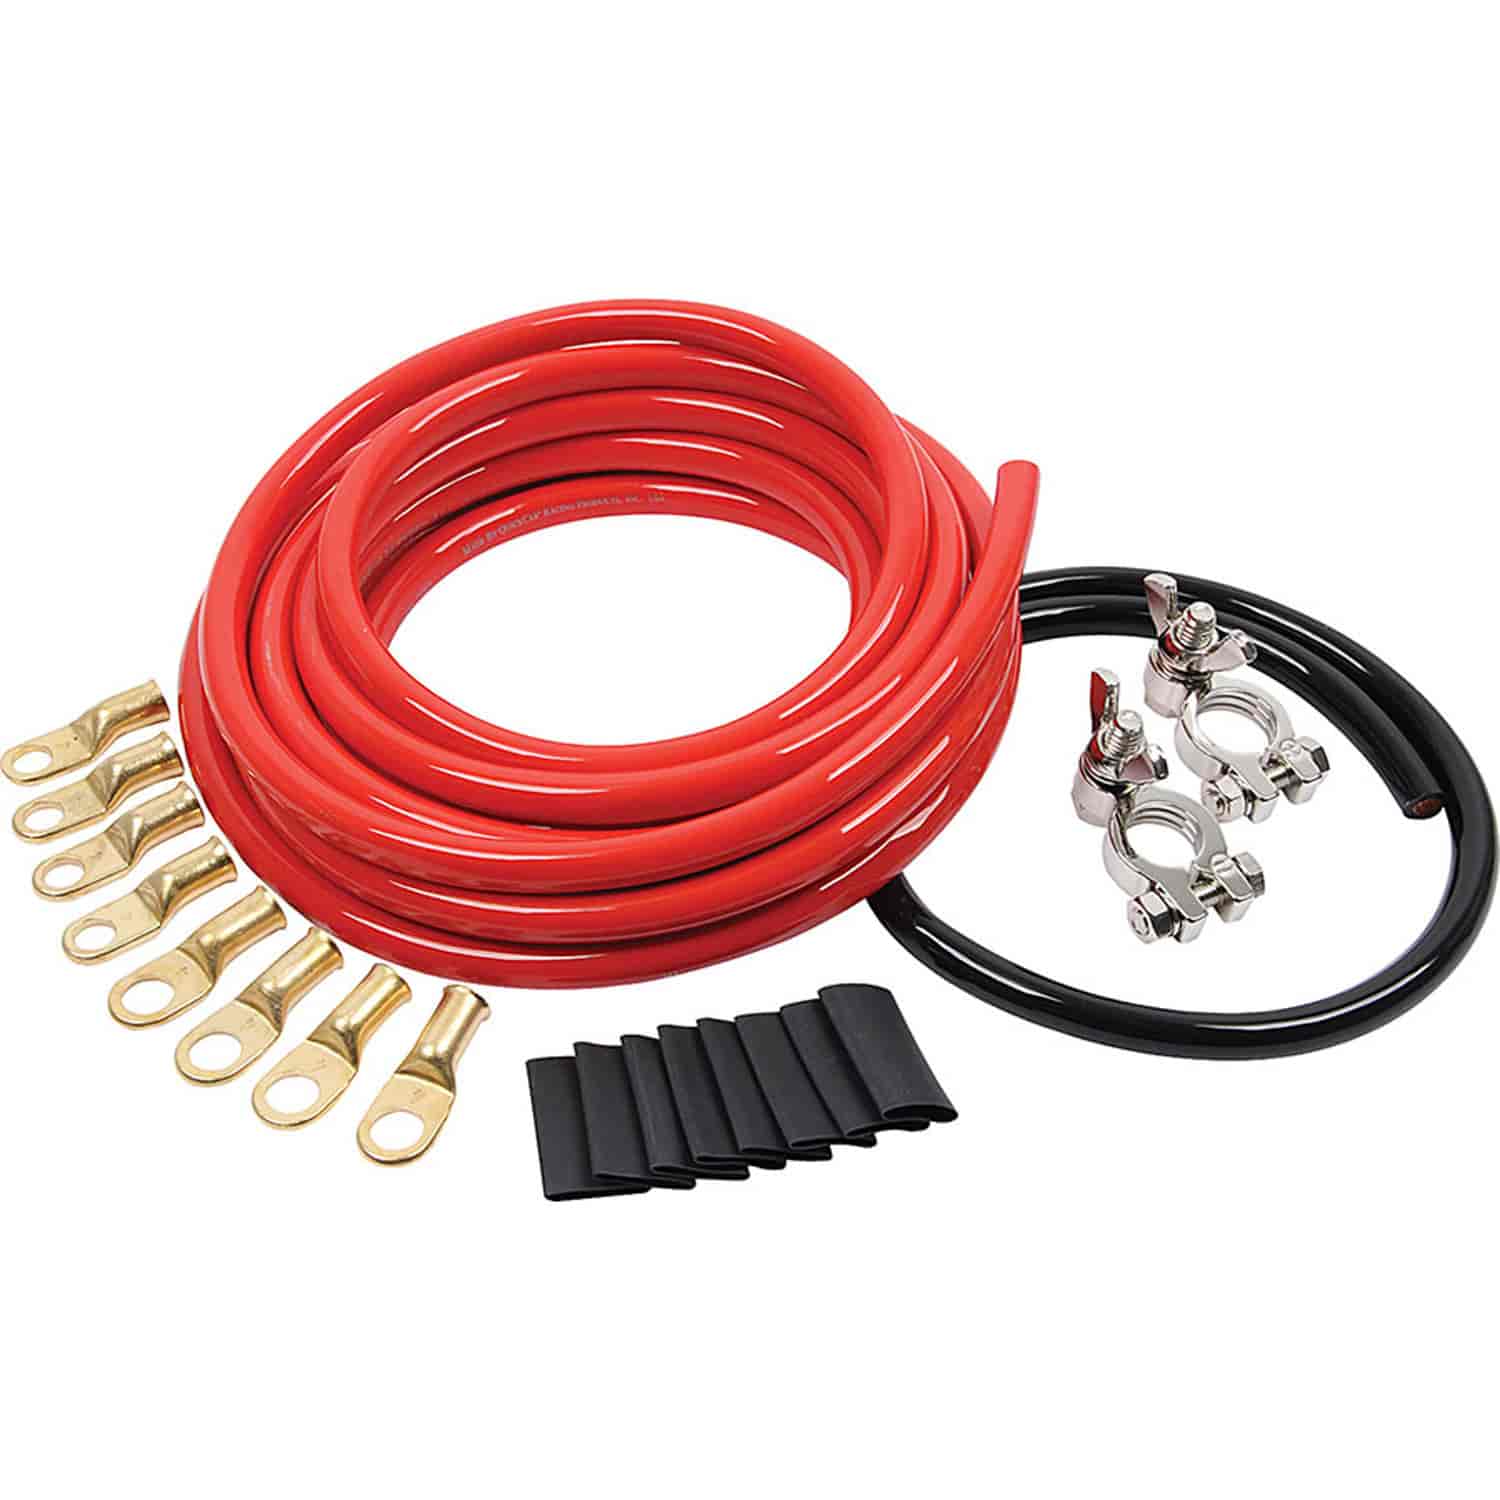 Battery Cable Kit 4 Gauge Cables